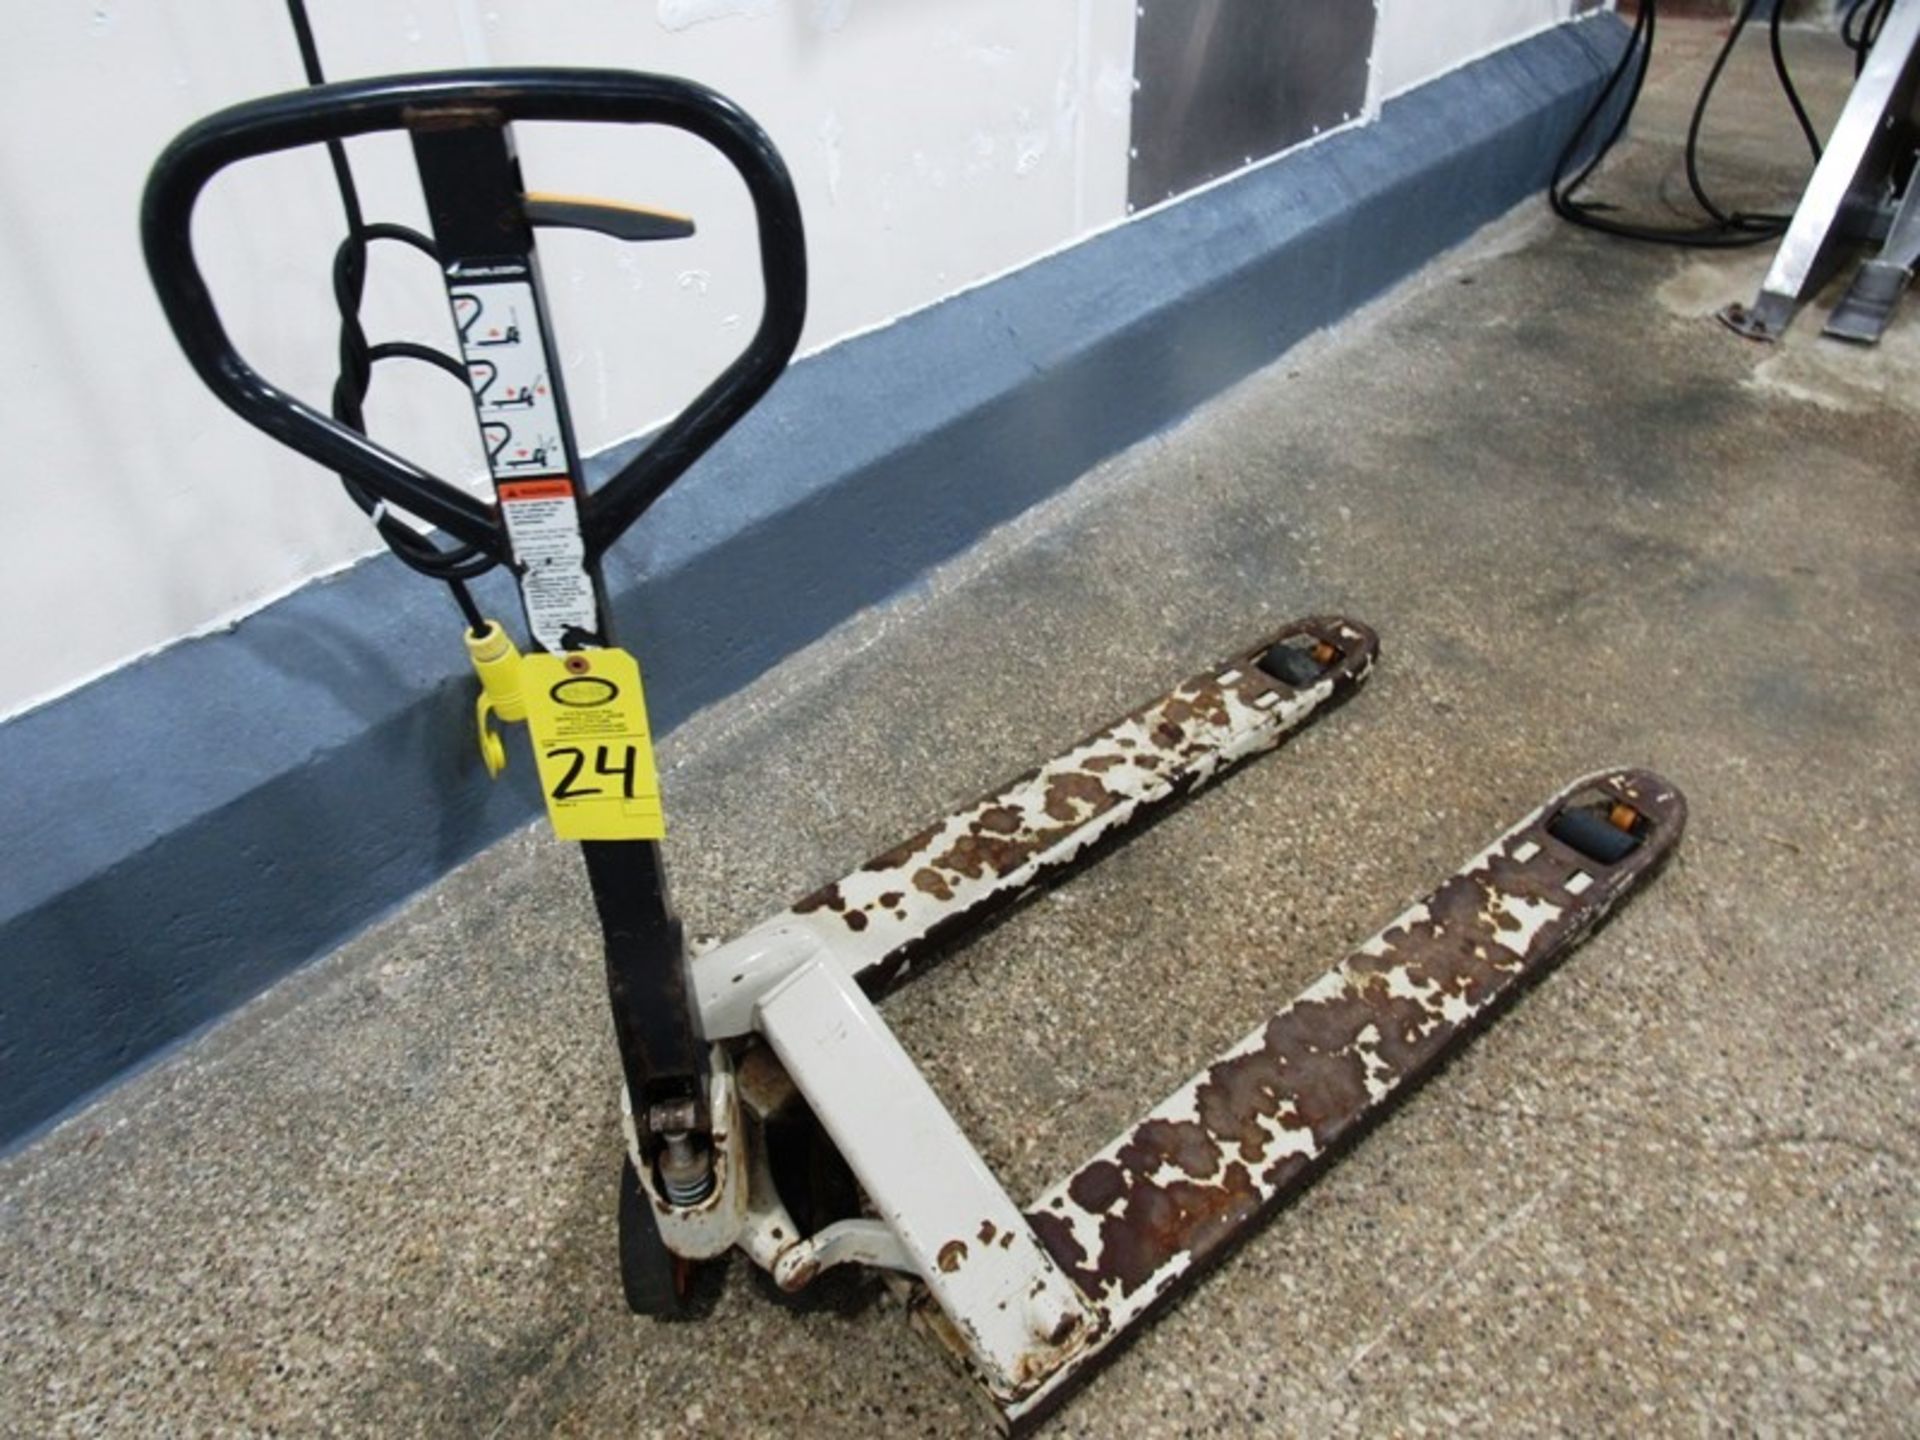 Crown Pallet Jack (did not raise) Removal: By Appointment Only. Required Rigging Fee $10.00 .